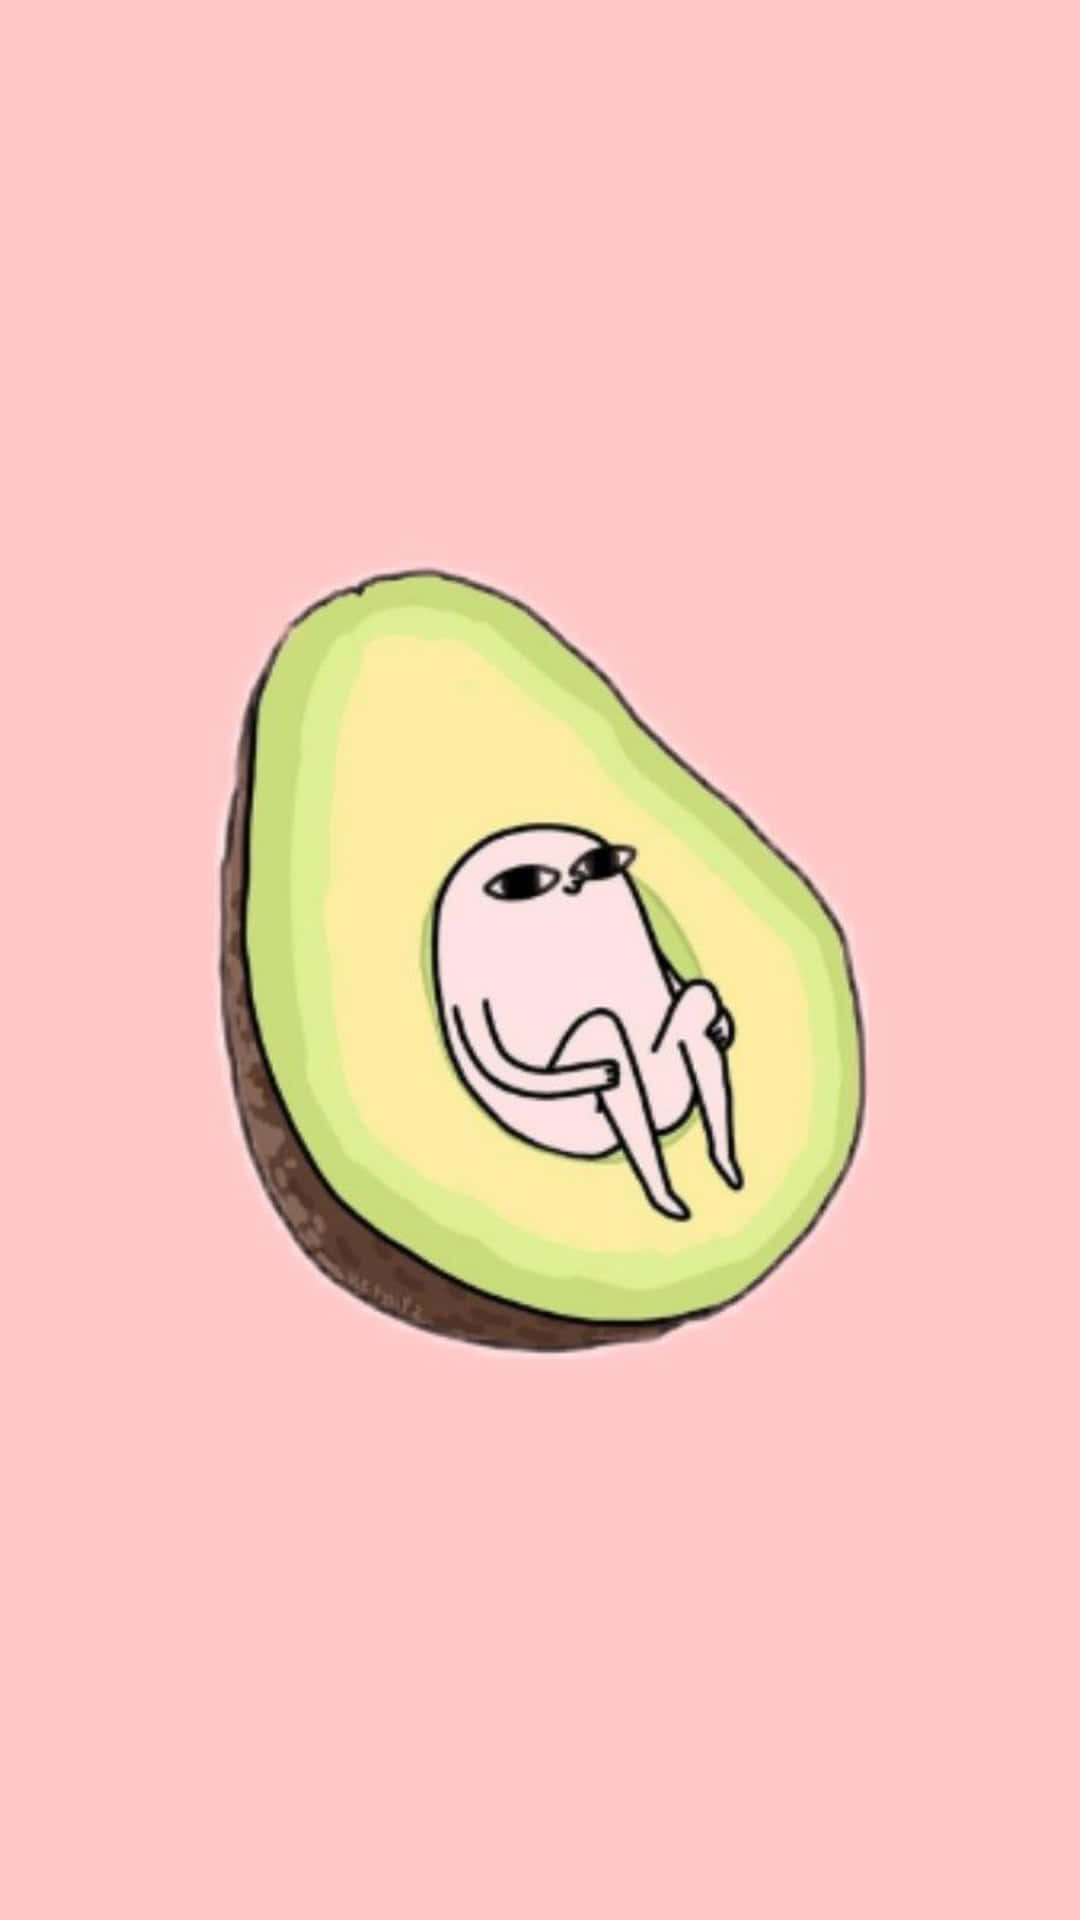 Resting Character On Avocado Iphone Wallpaper